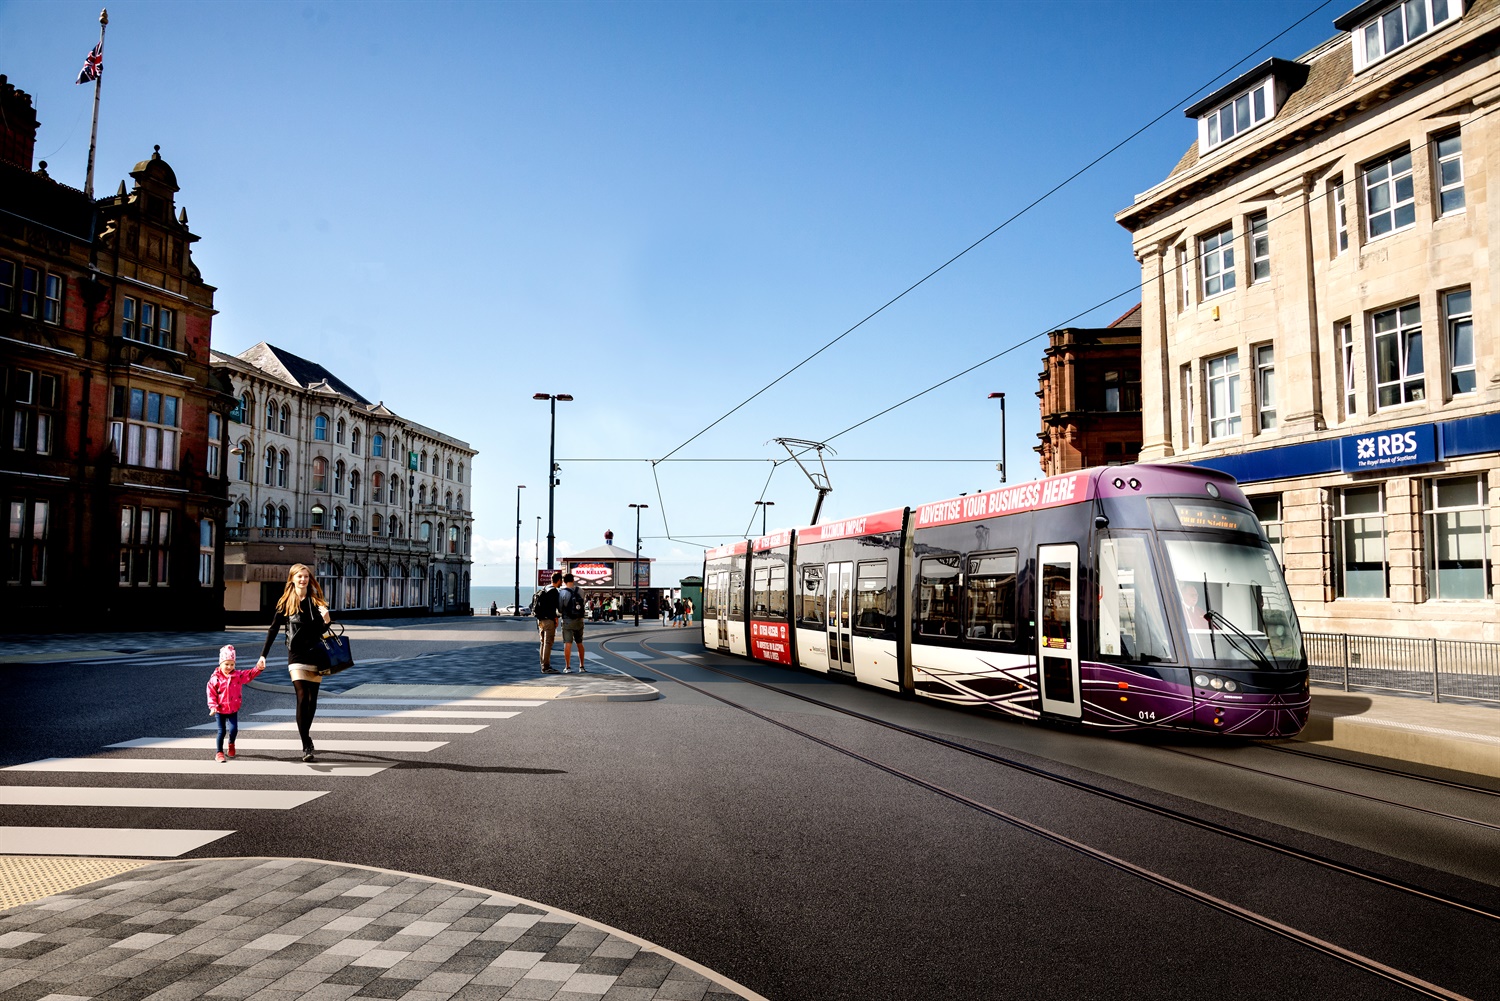 Blackpool Tramway extension: What's in store